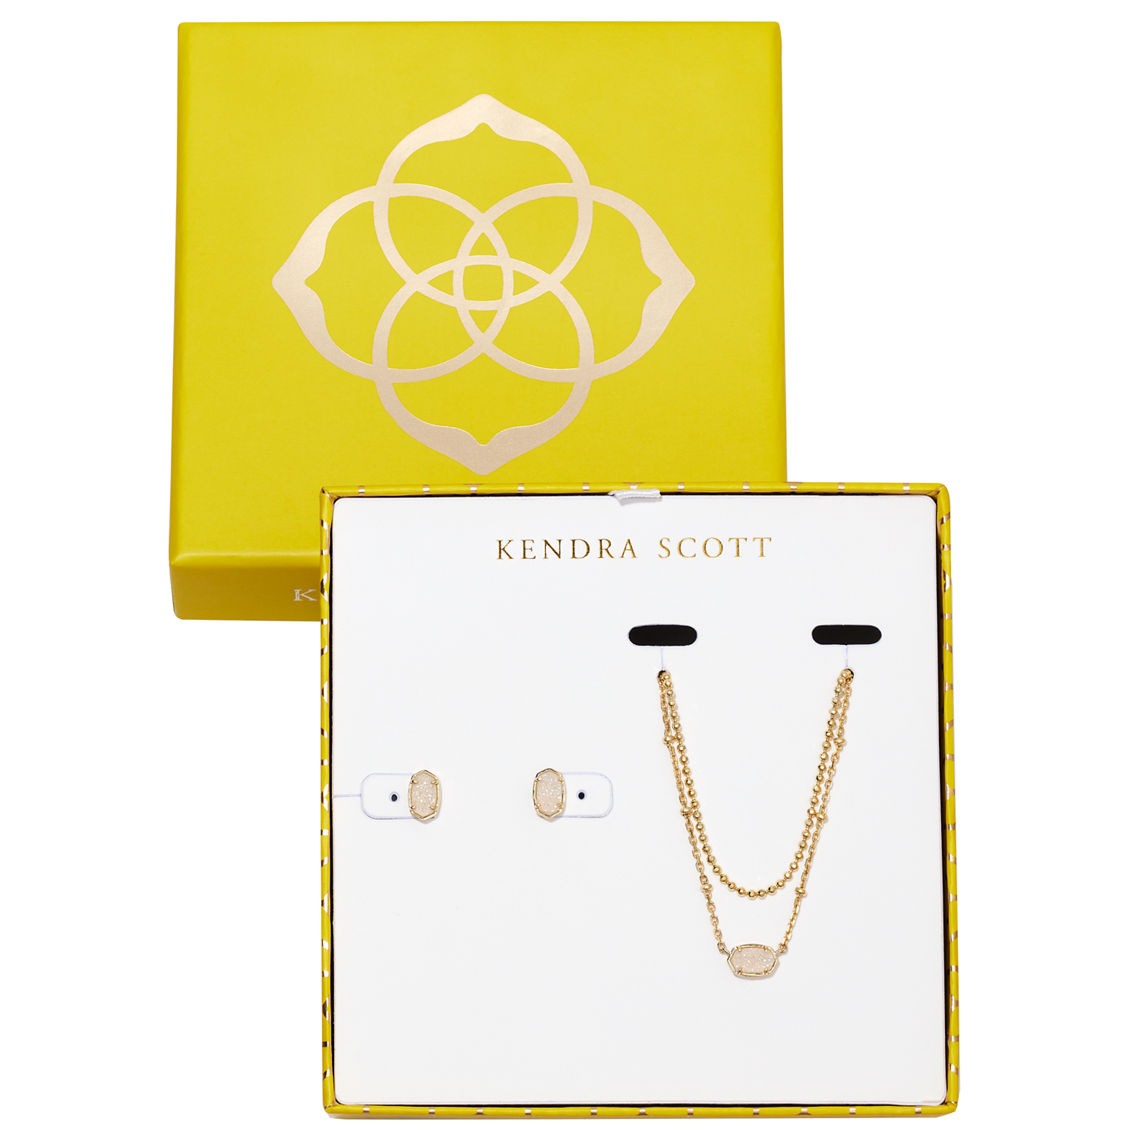 Kendra Scott Emilie Multi- Strand Necklace and Stud Earrings Gift Set - Image 4 of 4